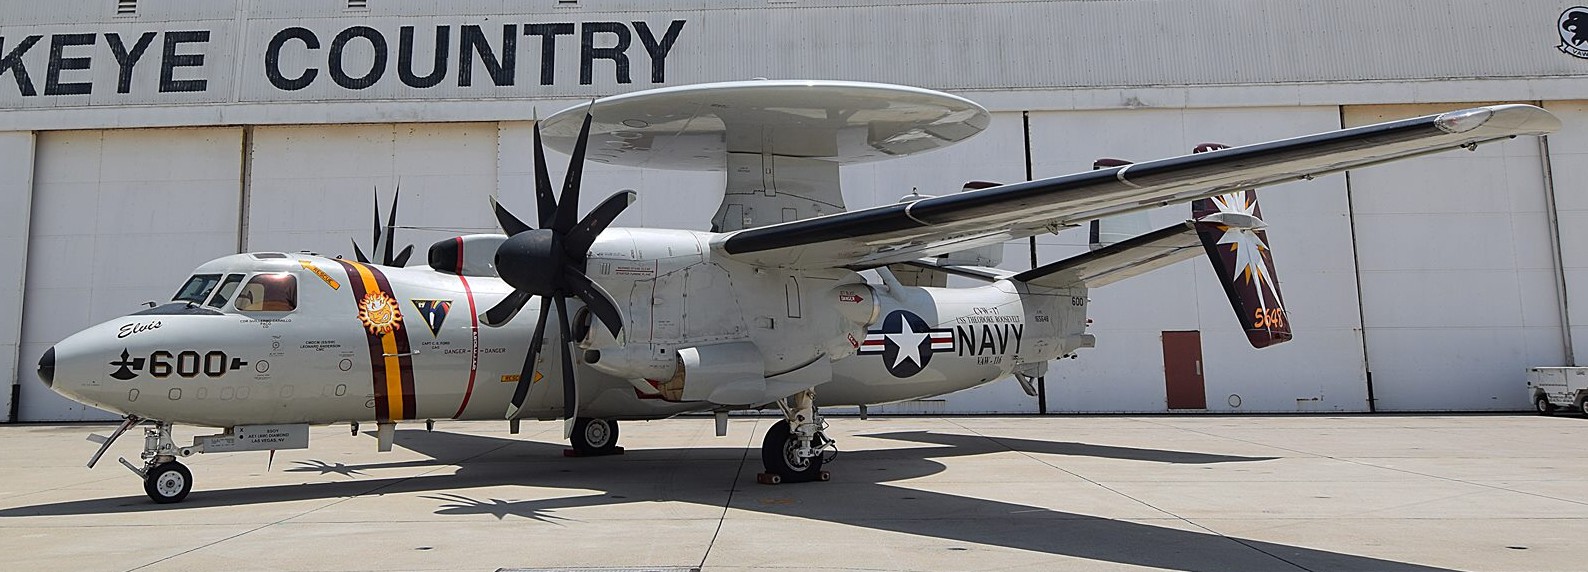 vaw-116 sun kings airborne command control squadron carrier early warning cvw-17 naval base ventura county point mugu 80